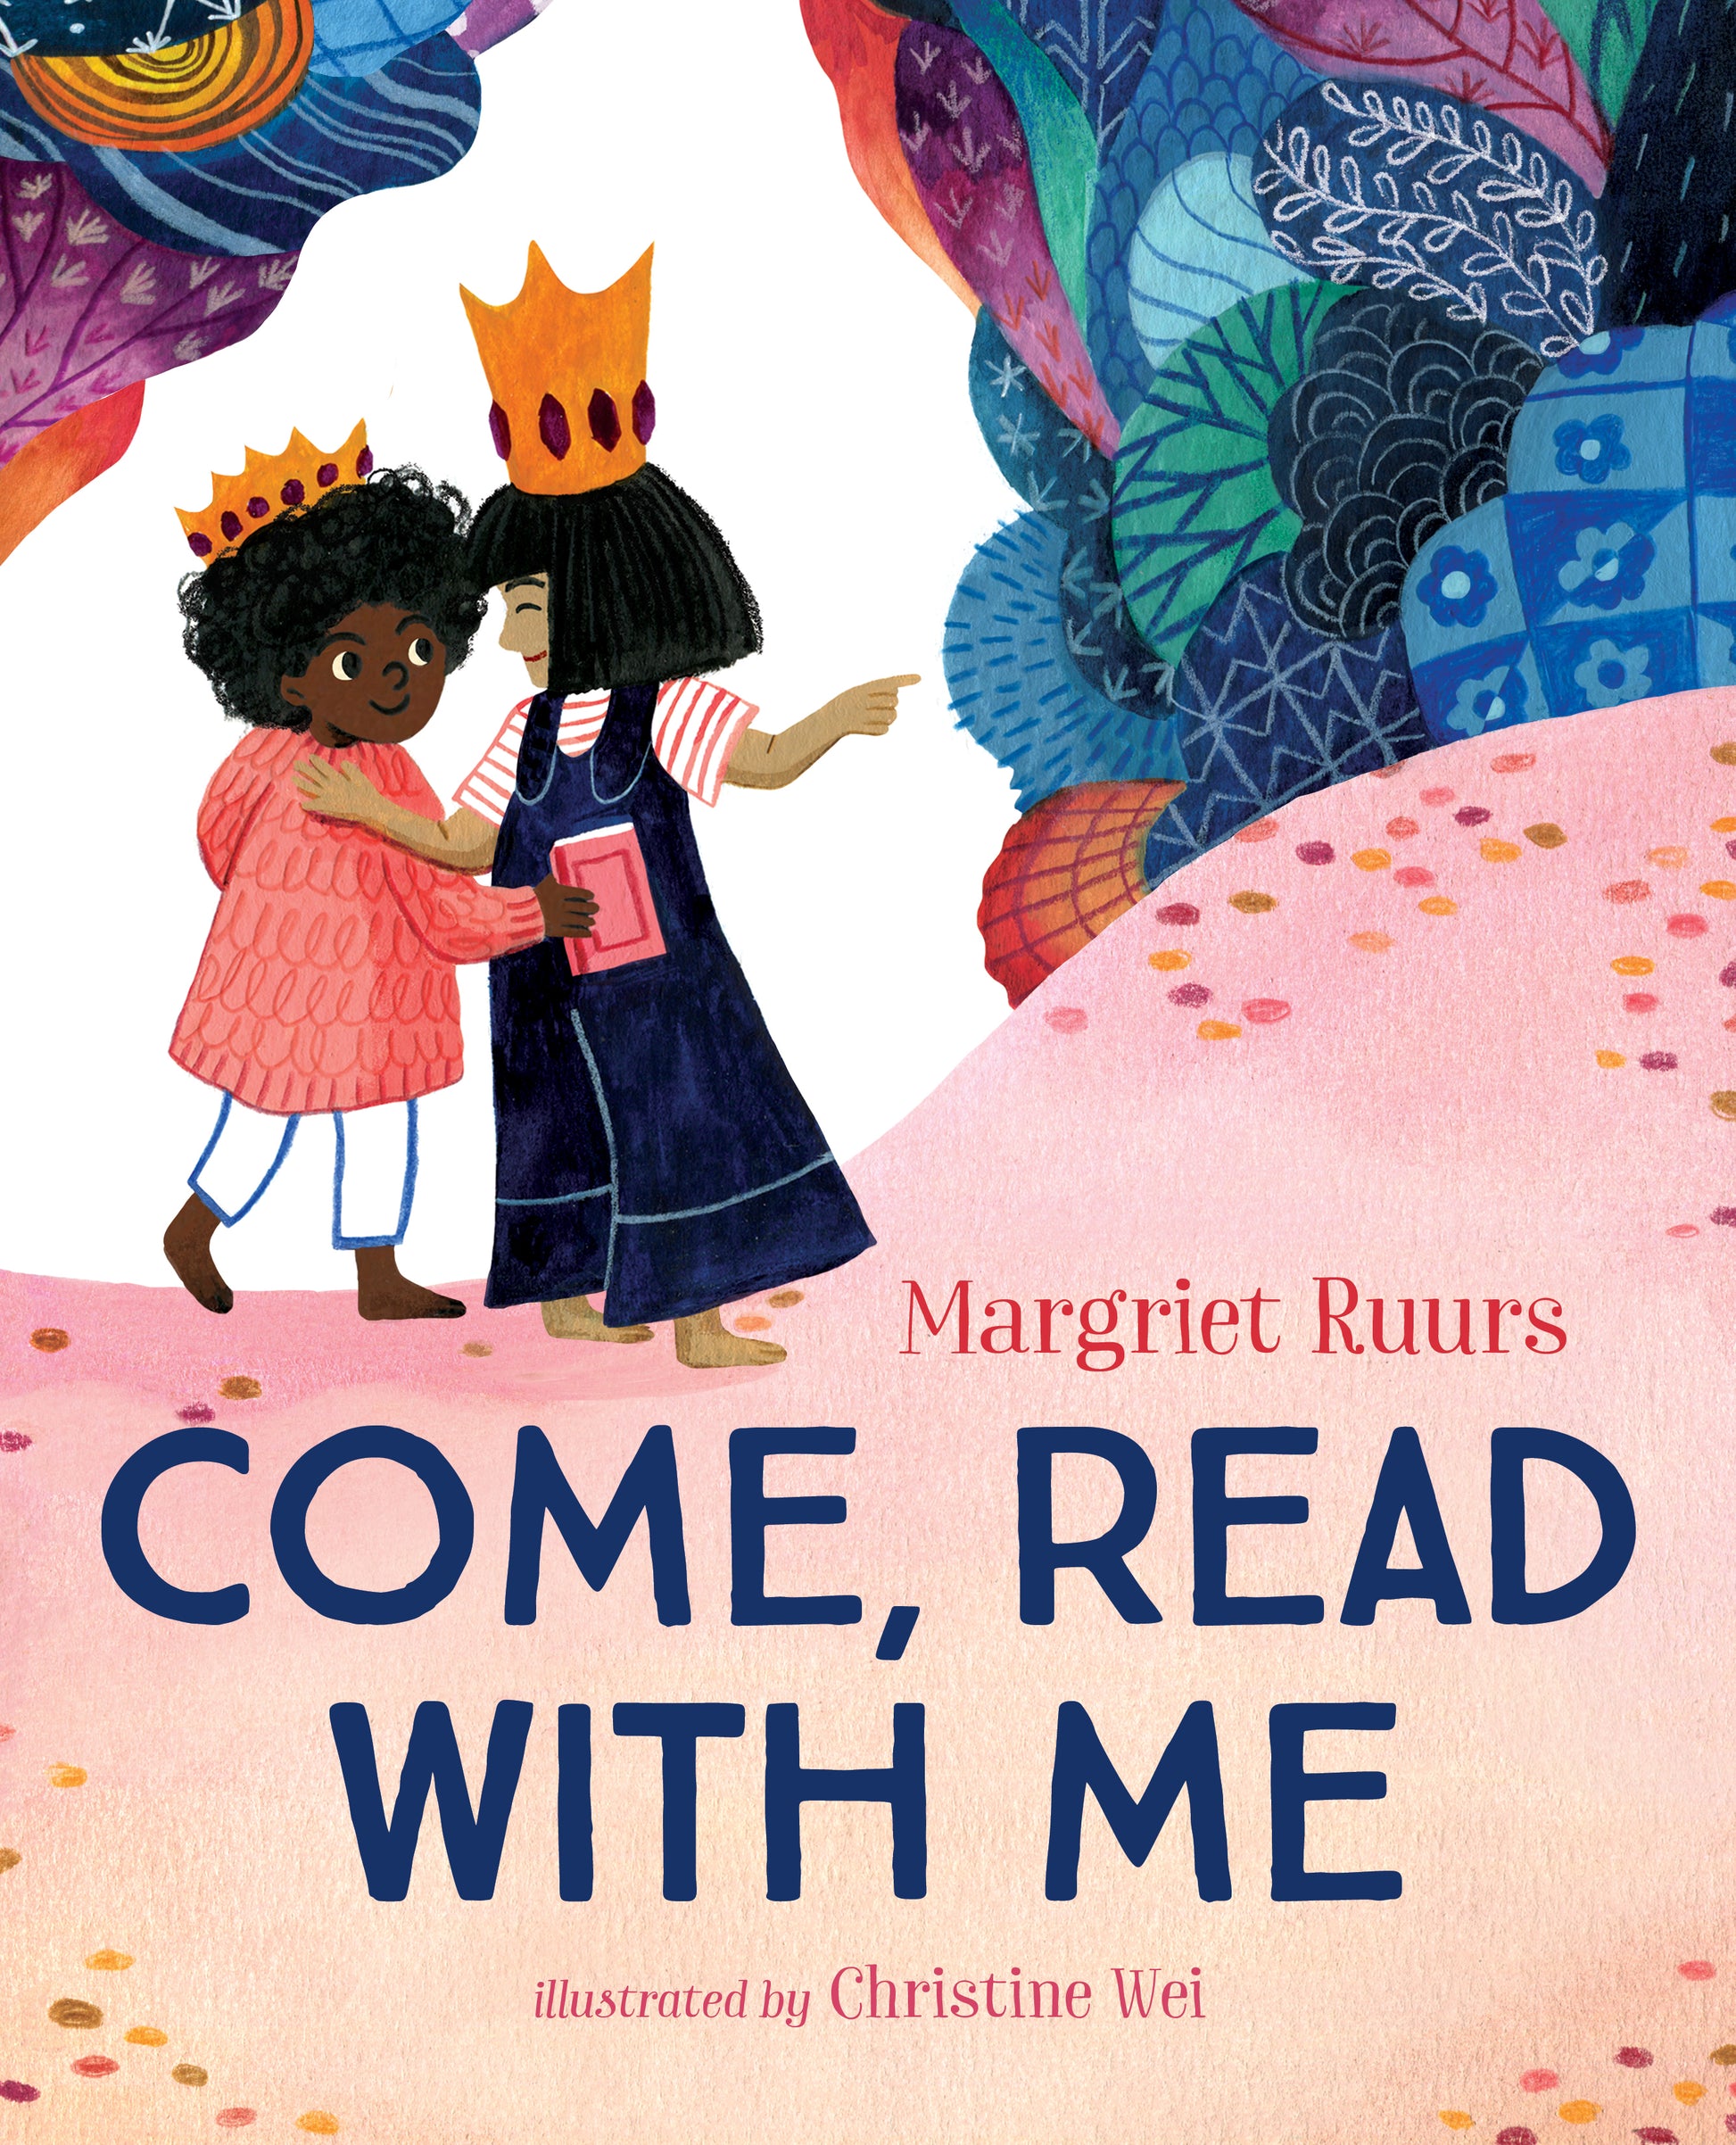 Come, Read With Me by Margriet Ruurs, Illustrated by Christine Wei. Two children wearing crowns with arms around each other and looking at each other, one child points ahead to where they are walking